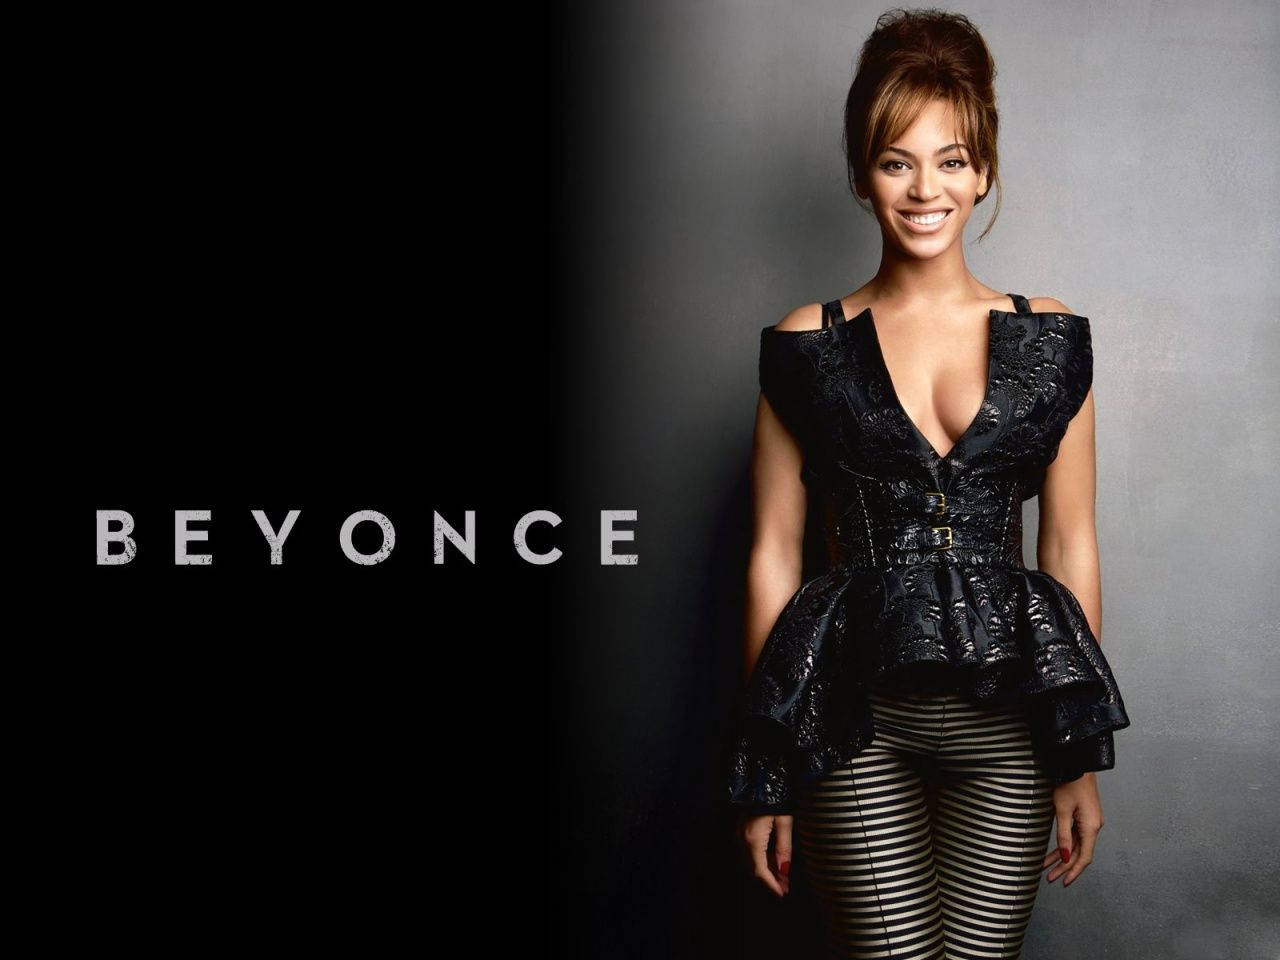 Cheerful Beyonce In Black Outfit